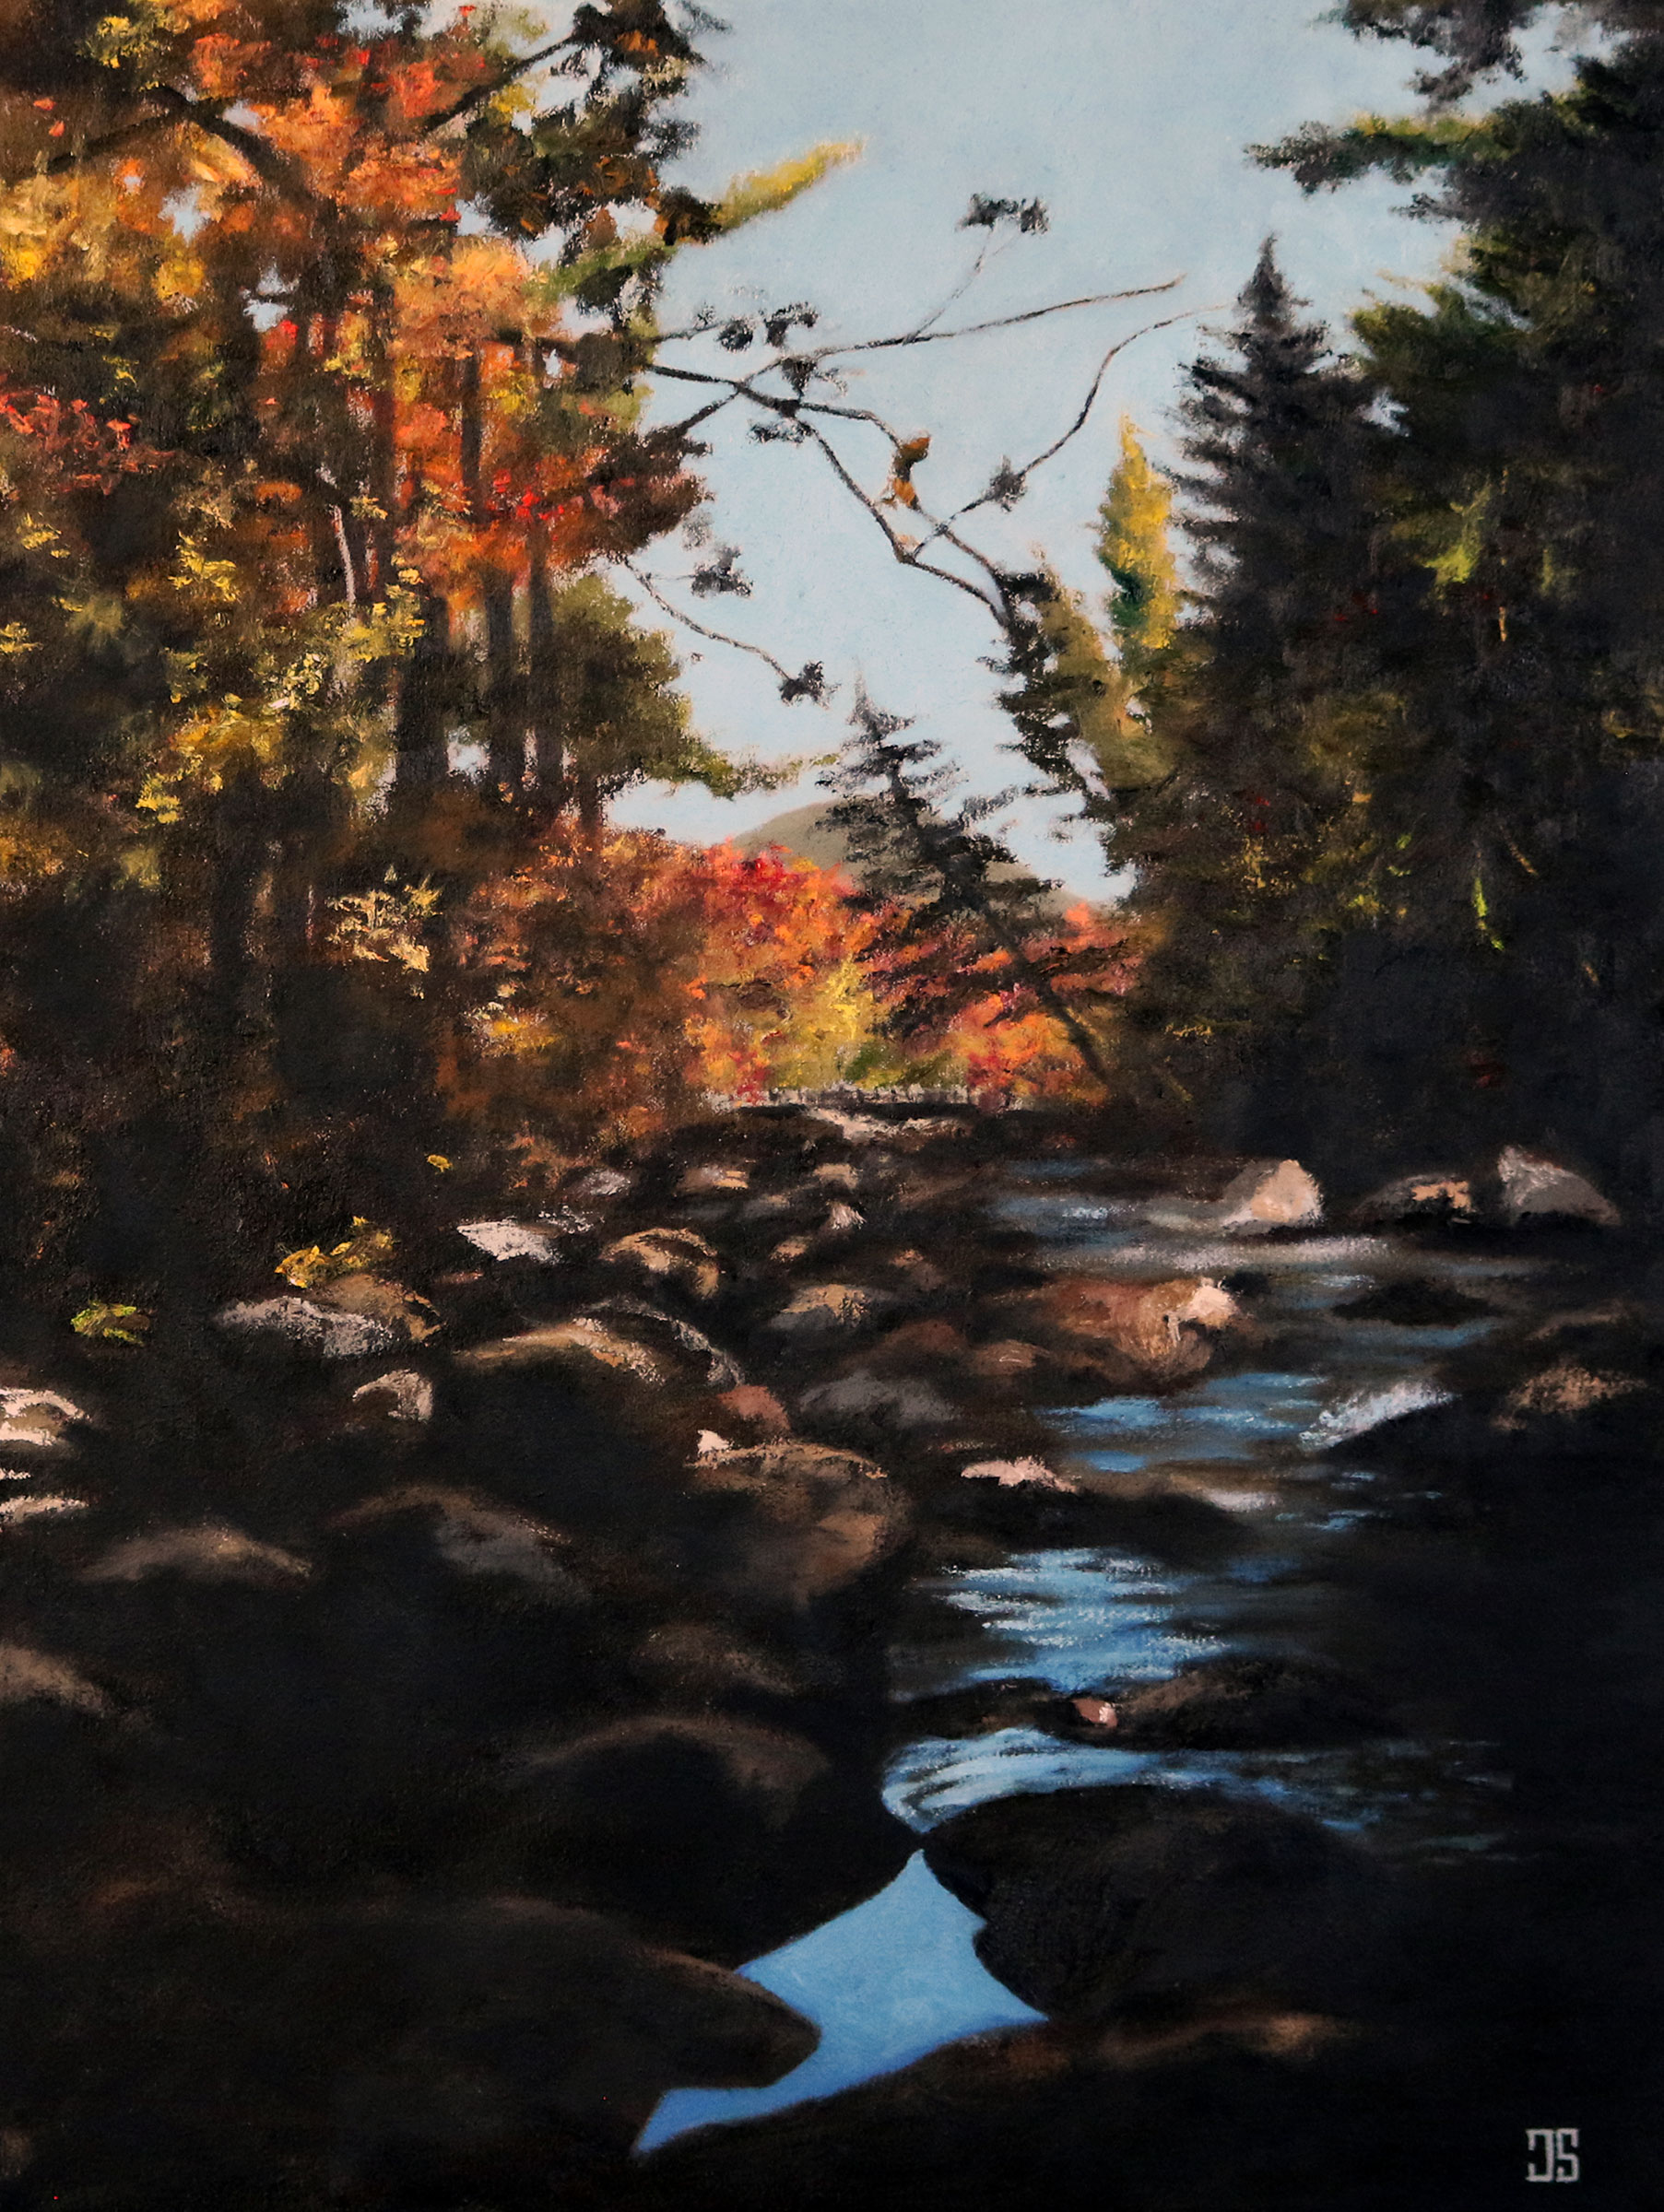 Oil painting "Otter Rocks, White Mountain National Forest, New Hampshire" by Jeffrey Dale Starr